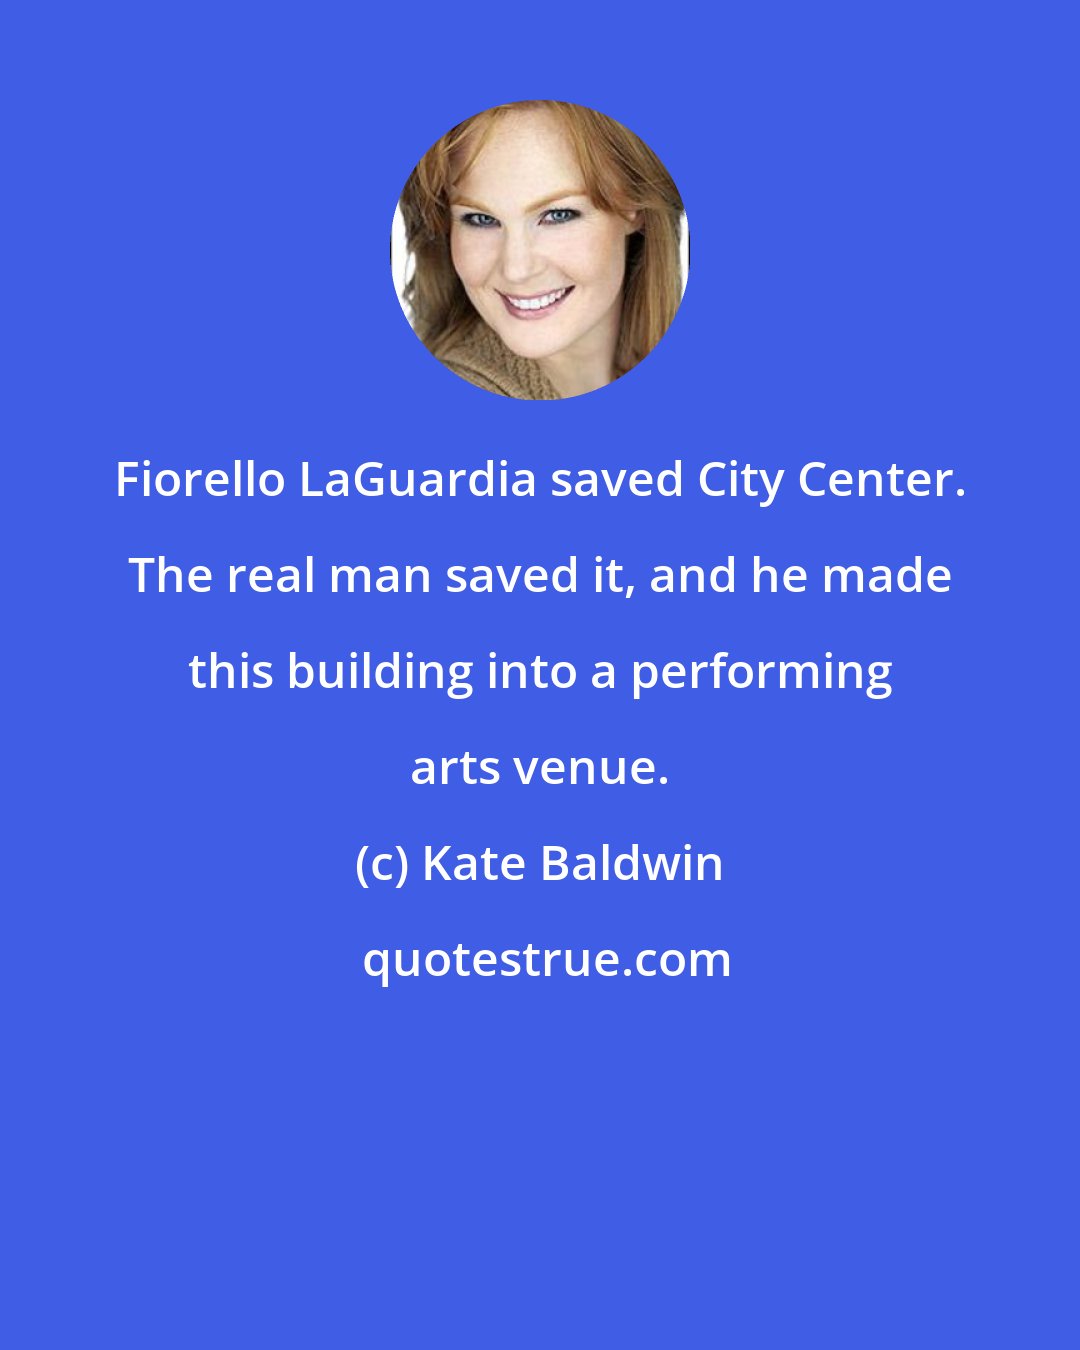 Kate Baldwin: Fiorello LaGuardia saved City Center. The real man saved it, and he made this building into a performing arts venue.